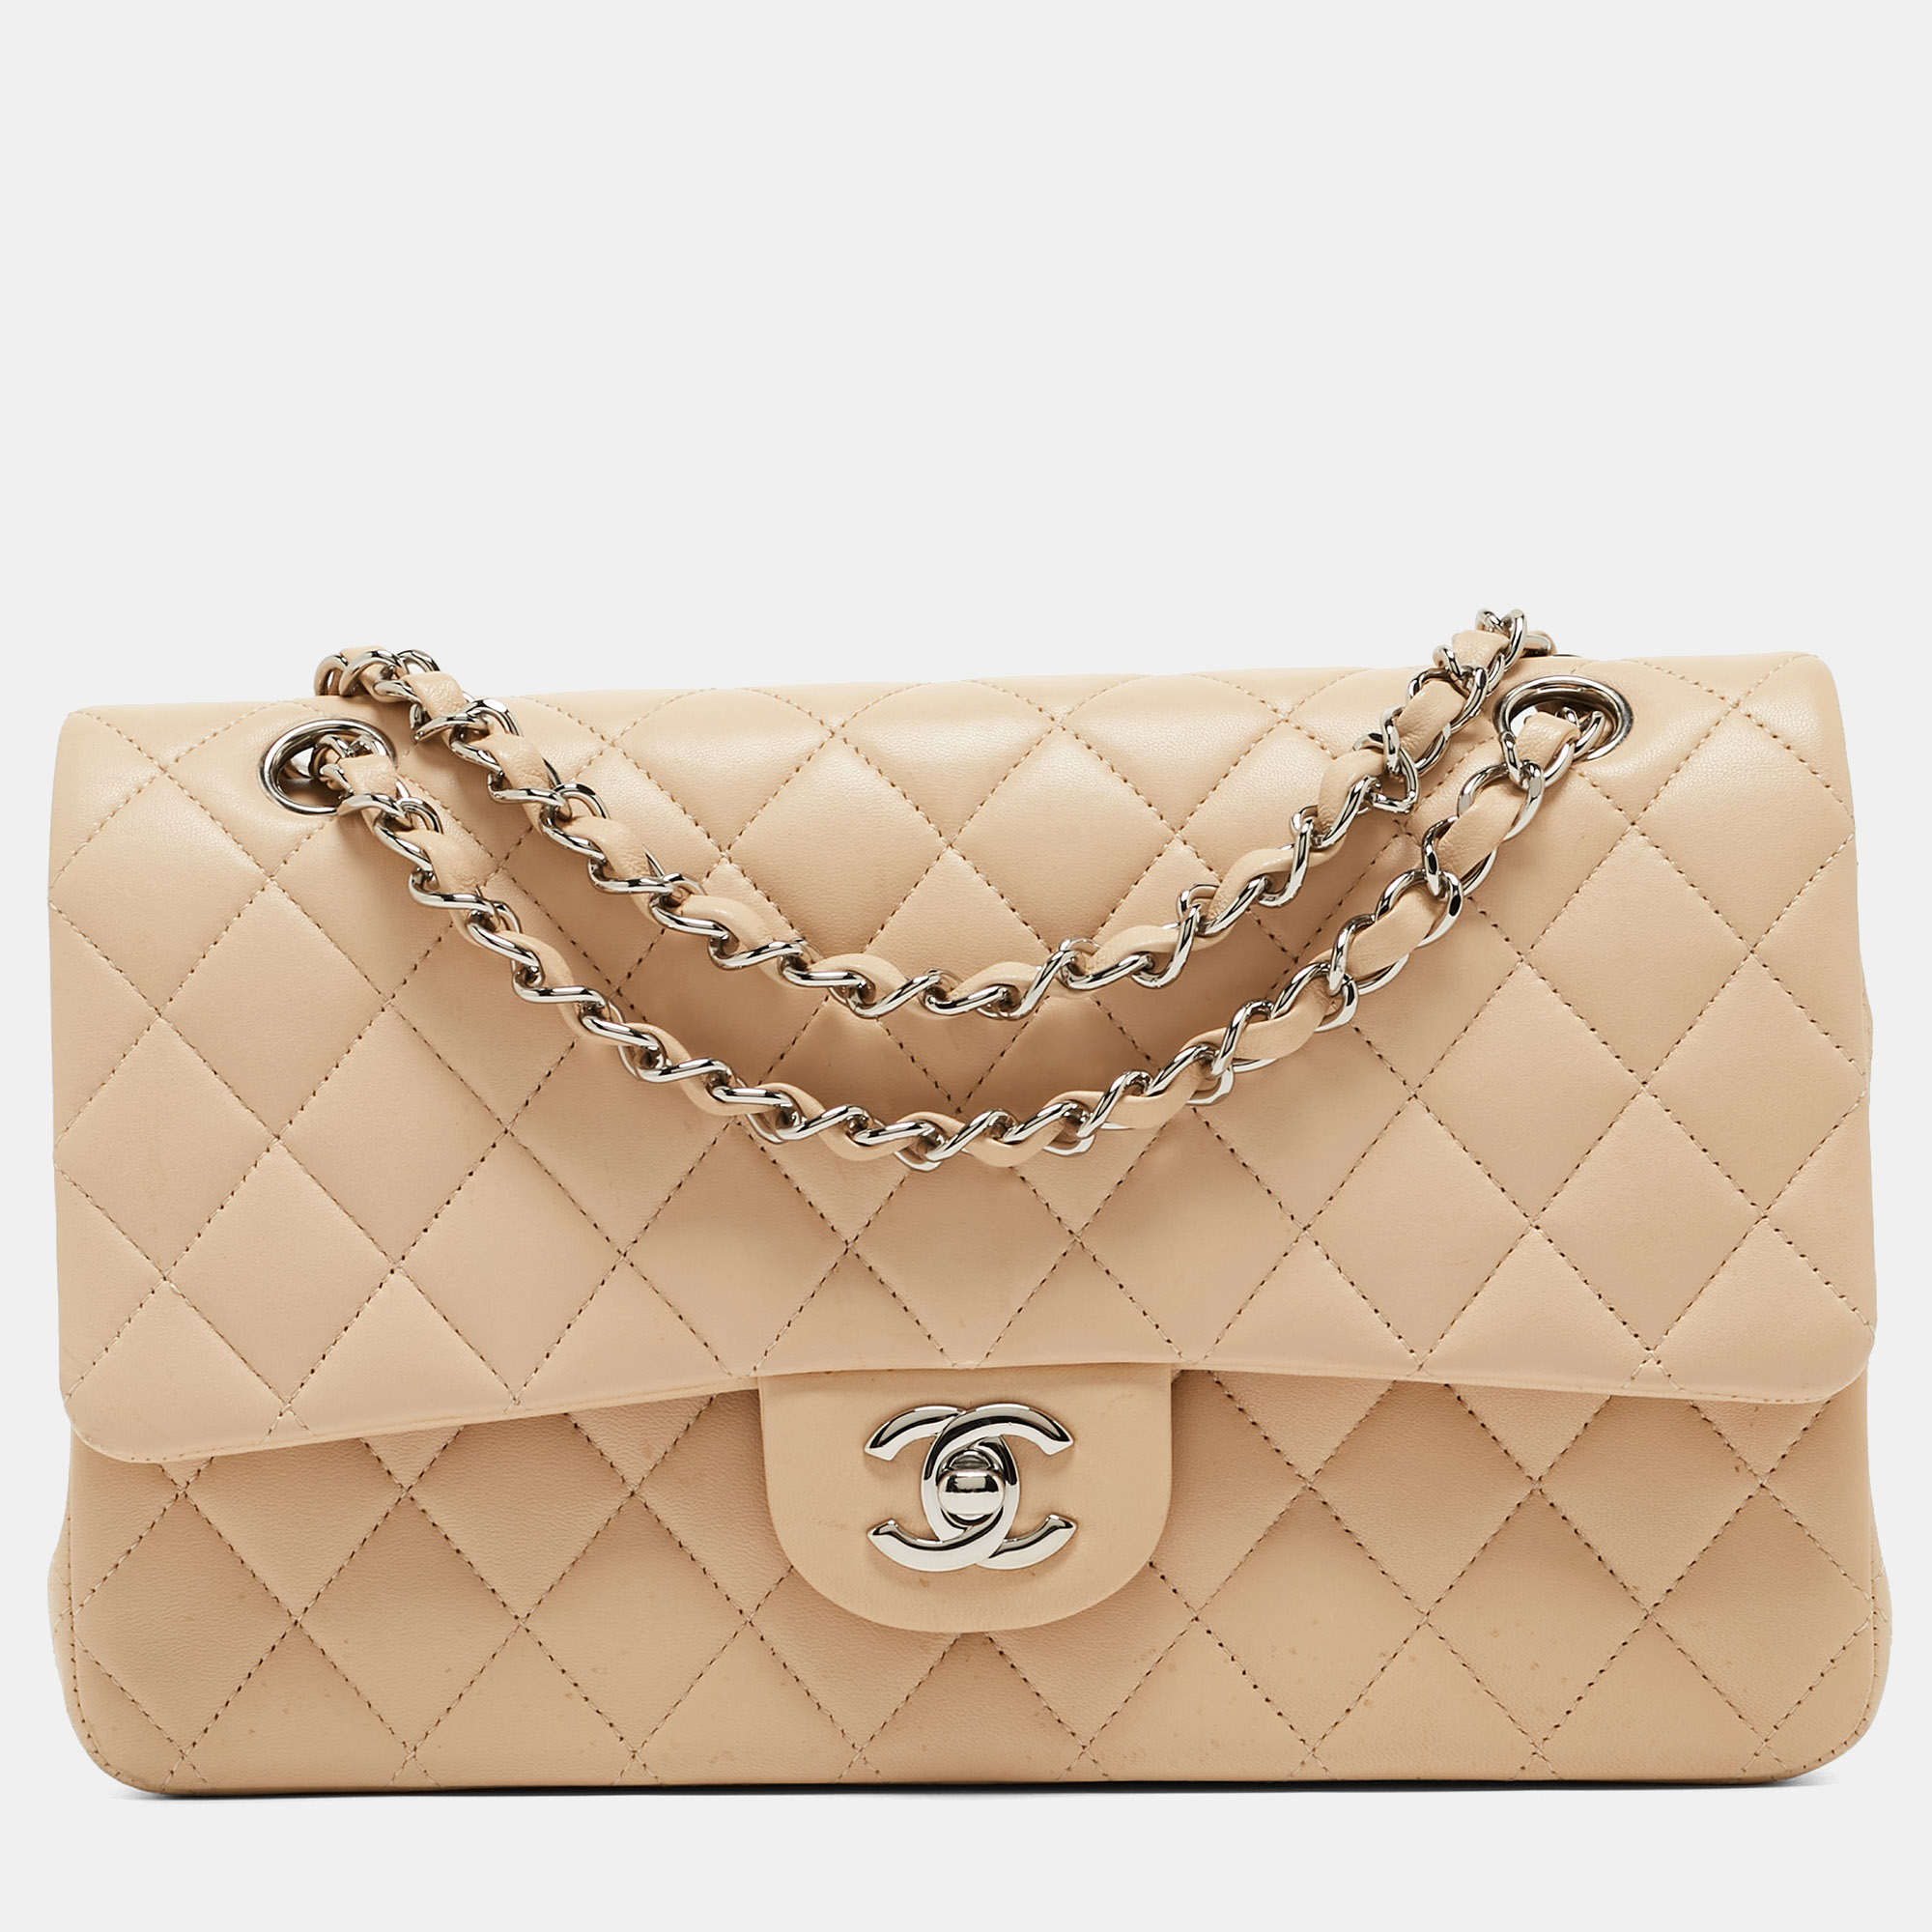 Chanel beige quilted leather medium classic double flap bag